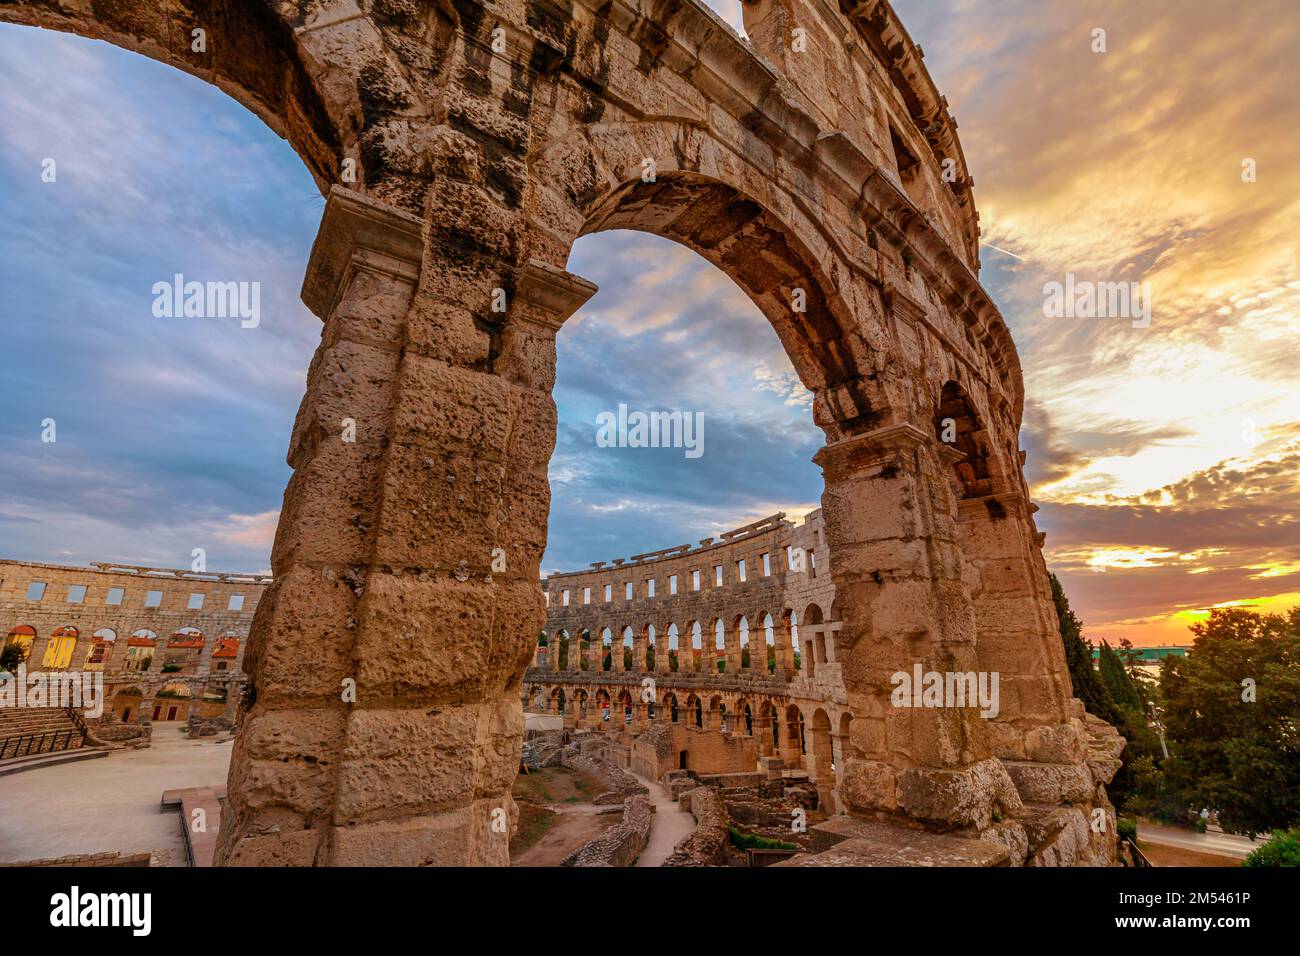 The Pula Amphitheater in Istria, Croatia as the evening wears on, the sky turns a stunning shade of pink and orange, creating a breathtaking backdrop Stock Photo